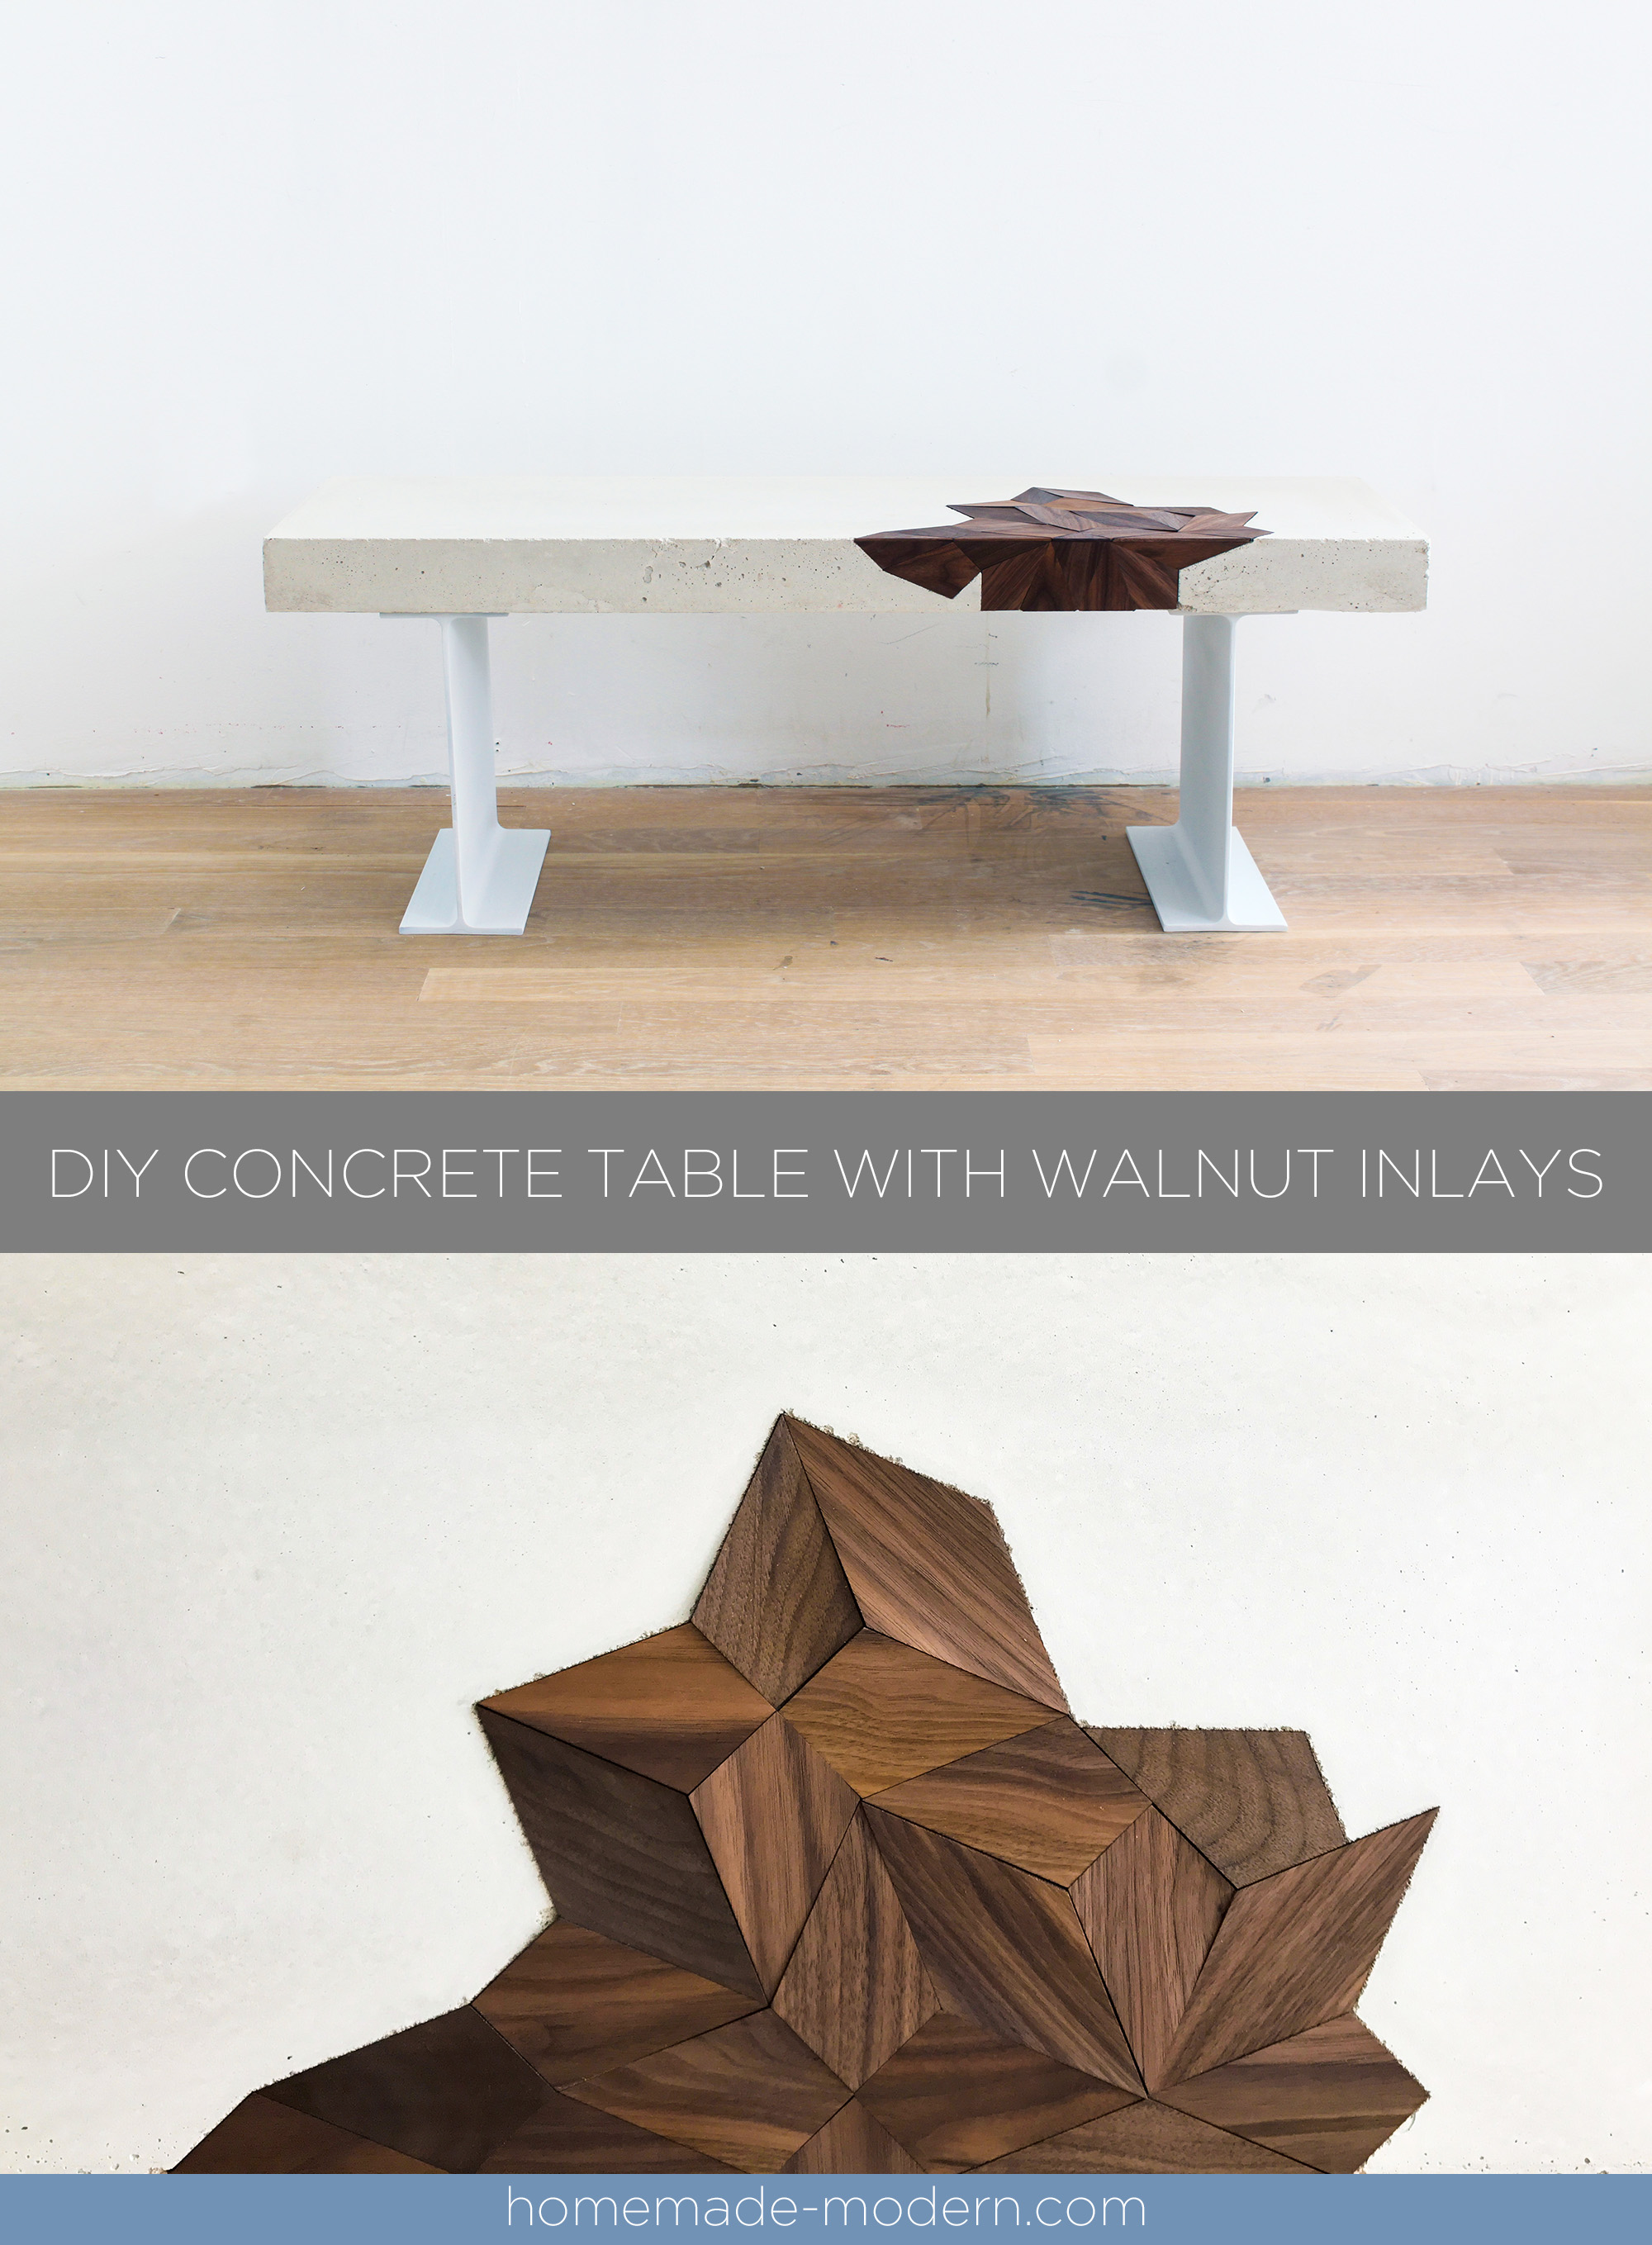 This white concrete table has a laser cut walnut inlay and was designed by Ben Uyeda. For more information go to HomeMade-Modern.com